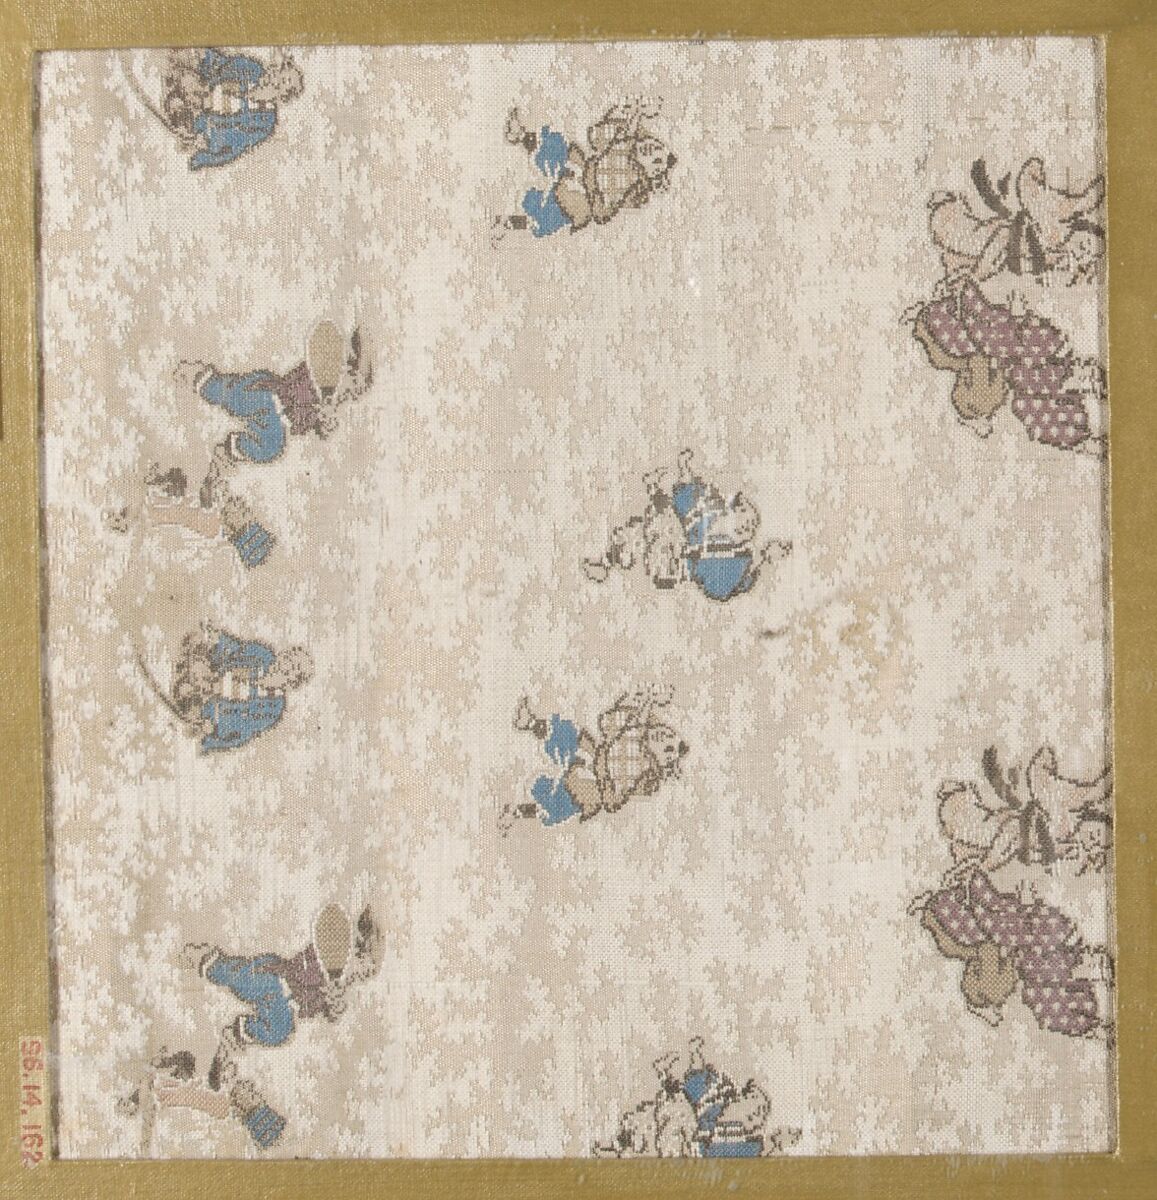 Textile fragment with scattered human figures on patterned ground, Silk, Japan 